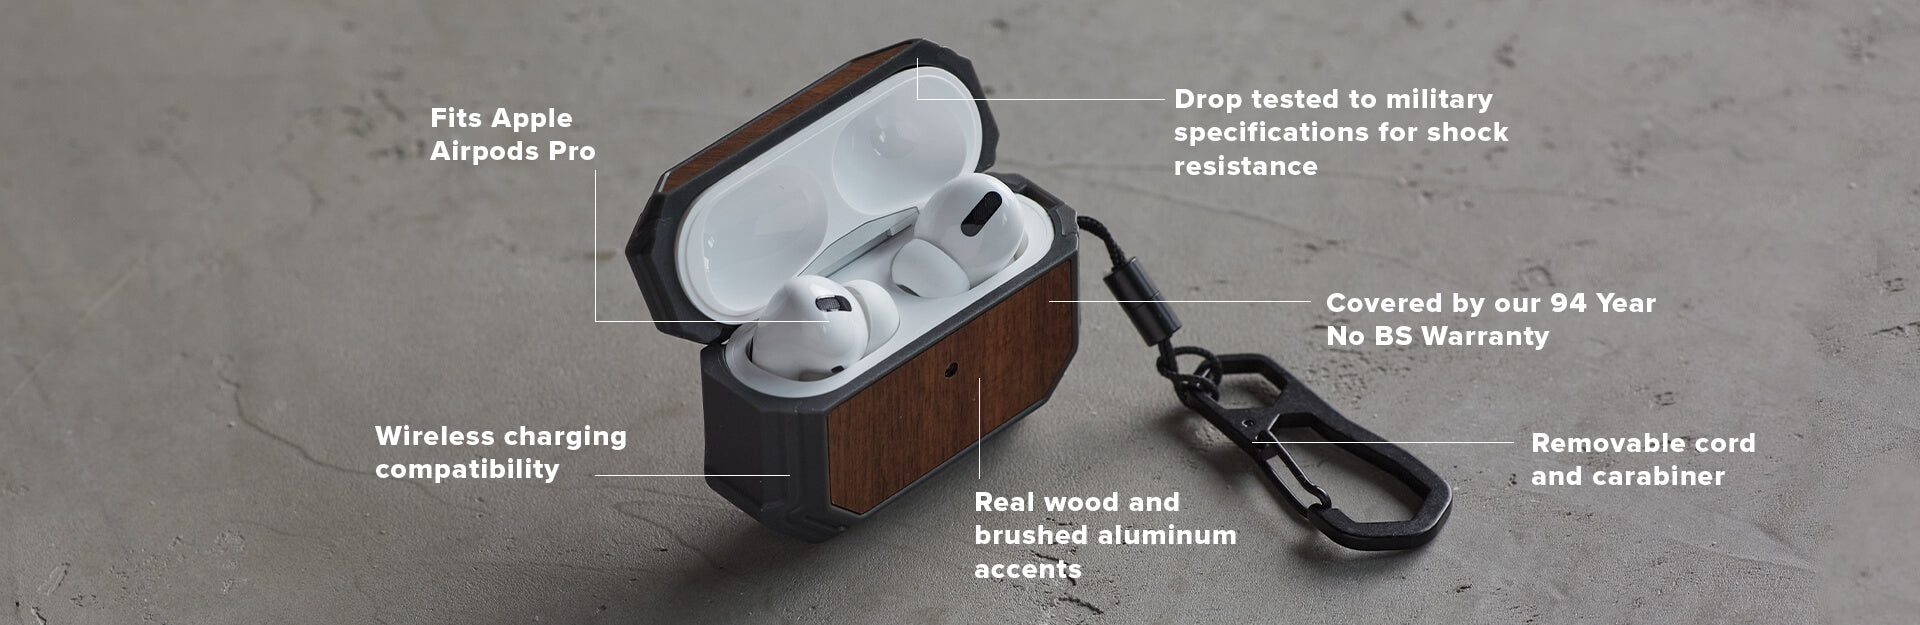 Fits Apple AirPods Pro, Drop tested to military specifications for shock resistance, wireless charging compatability, real wood and brushed aluminum accents, removable cord and carabiner, covered by our 94 year warranty